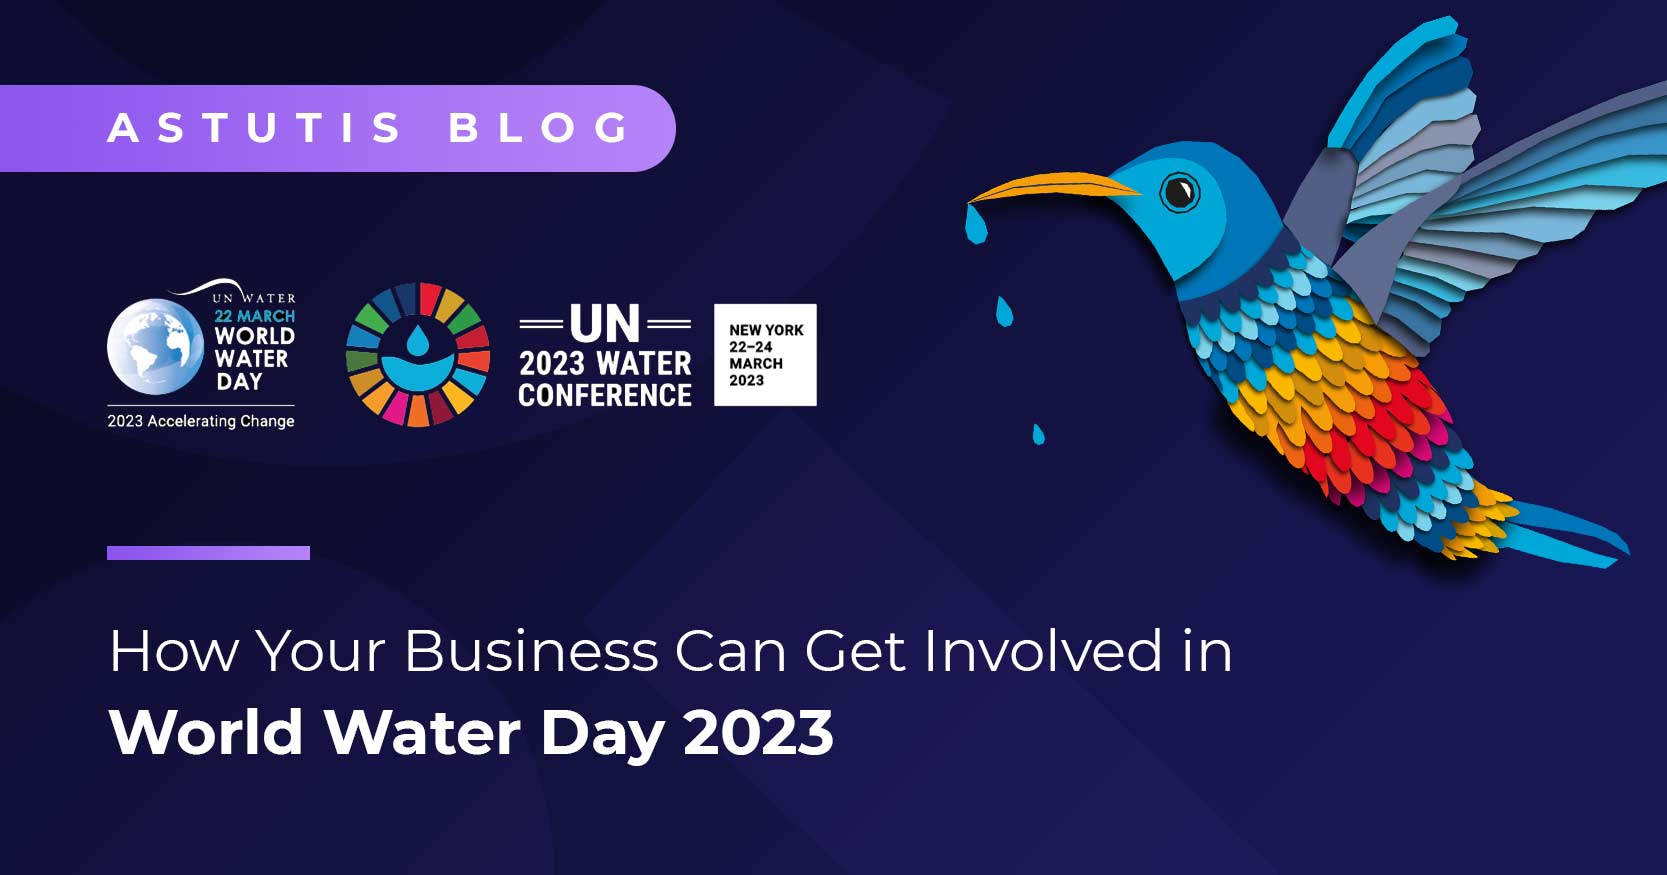 How Your Business Can Get Involved in World Water Day 2023! Image